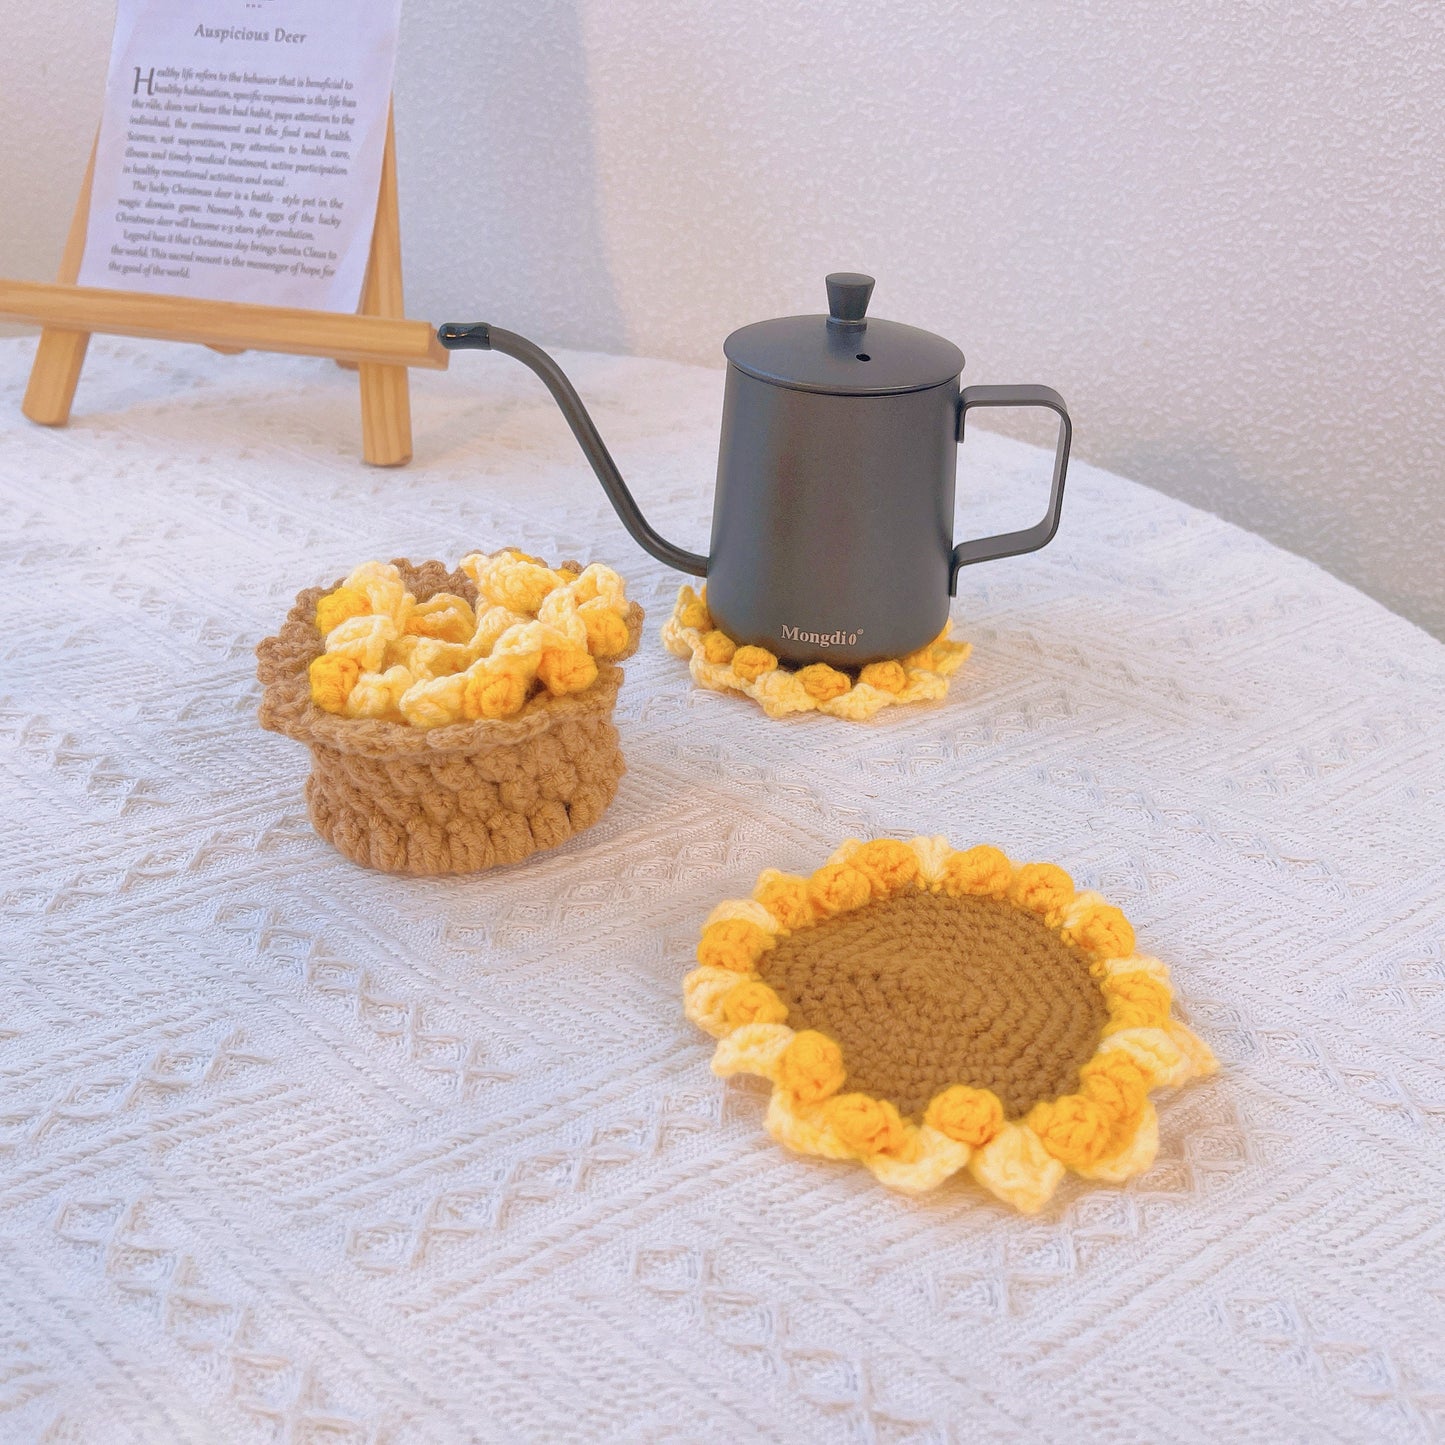 Handmade Crochet Sunflower Coaster in a Basket Set - Drink Mats, Table Protection, Kitchen Accessories, Housewarming Gift, Coasters Pot